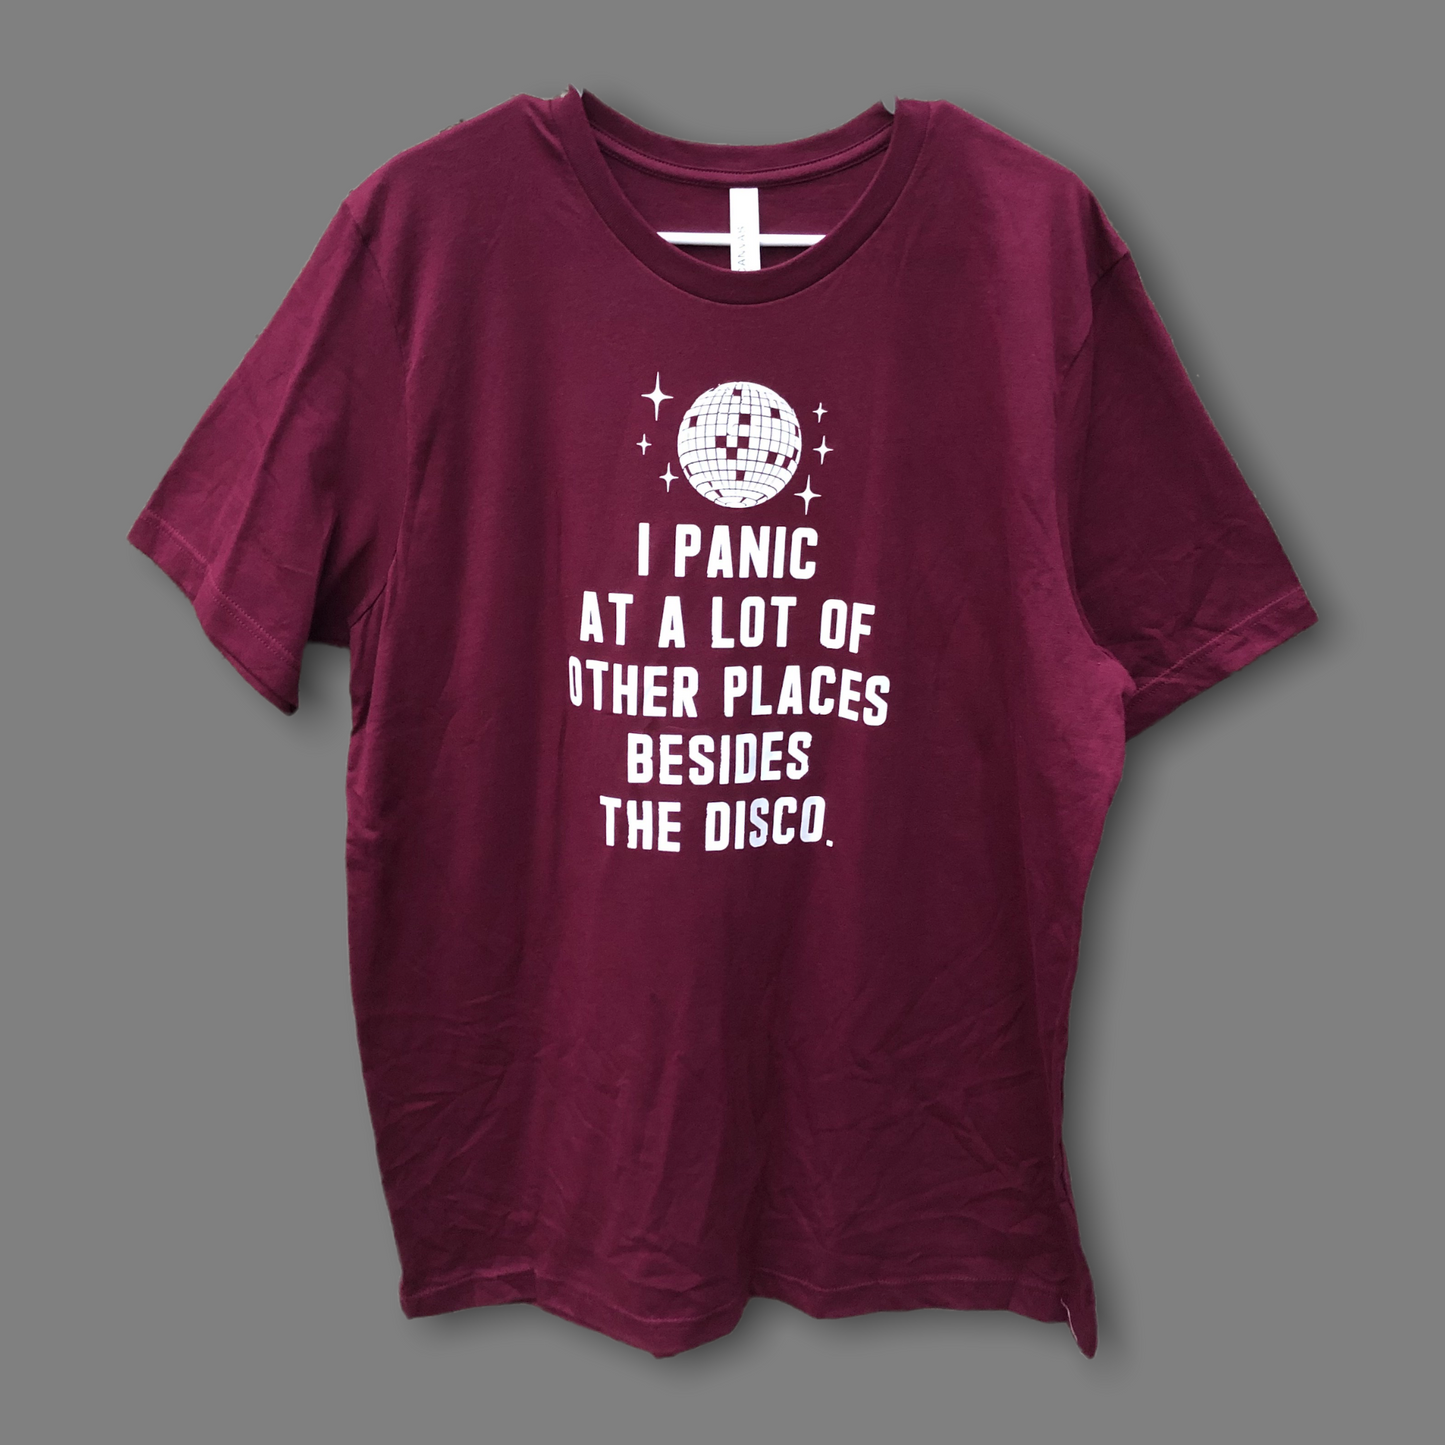 “ I Panic at a Lot of Other Places Besides the Disco” Shirt